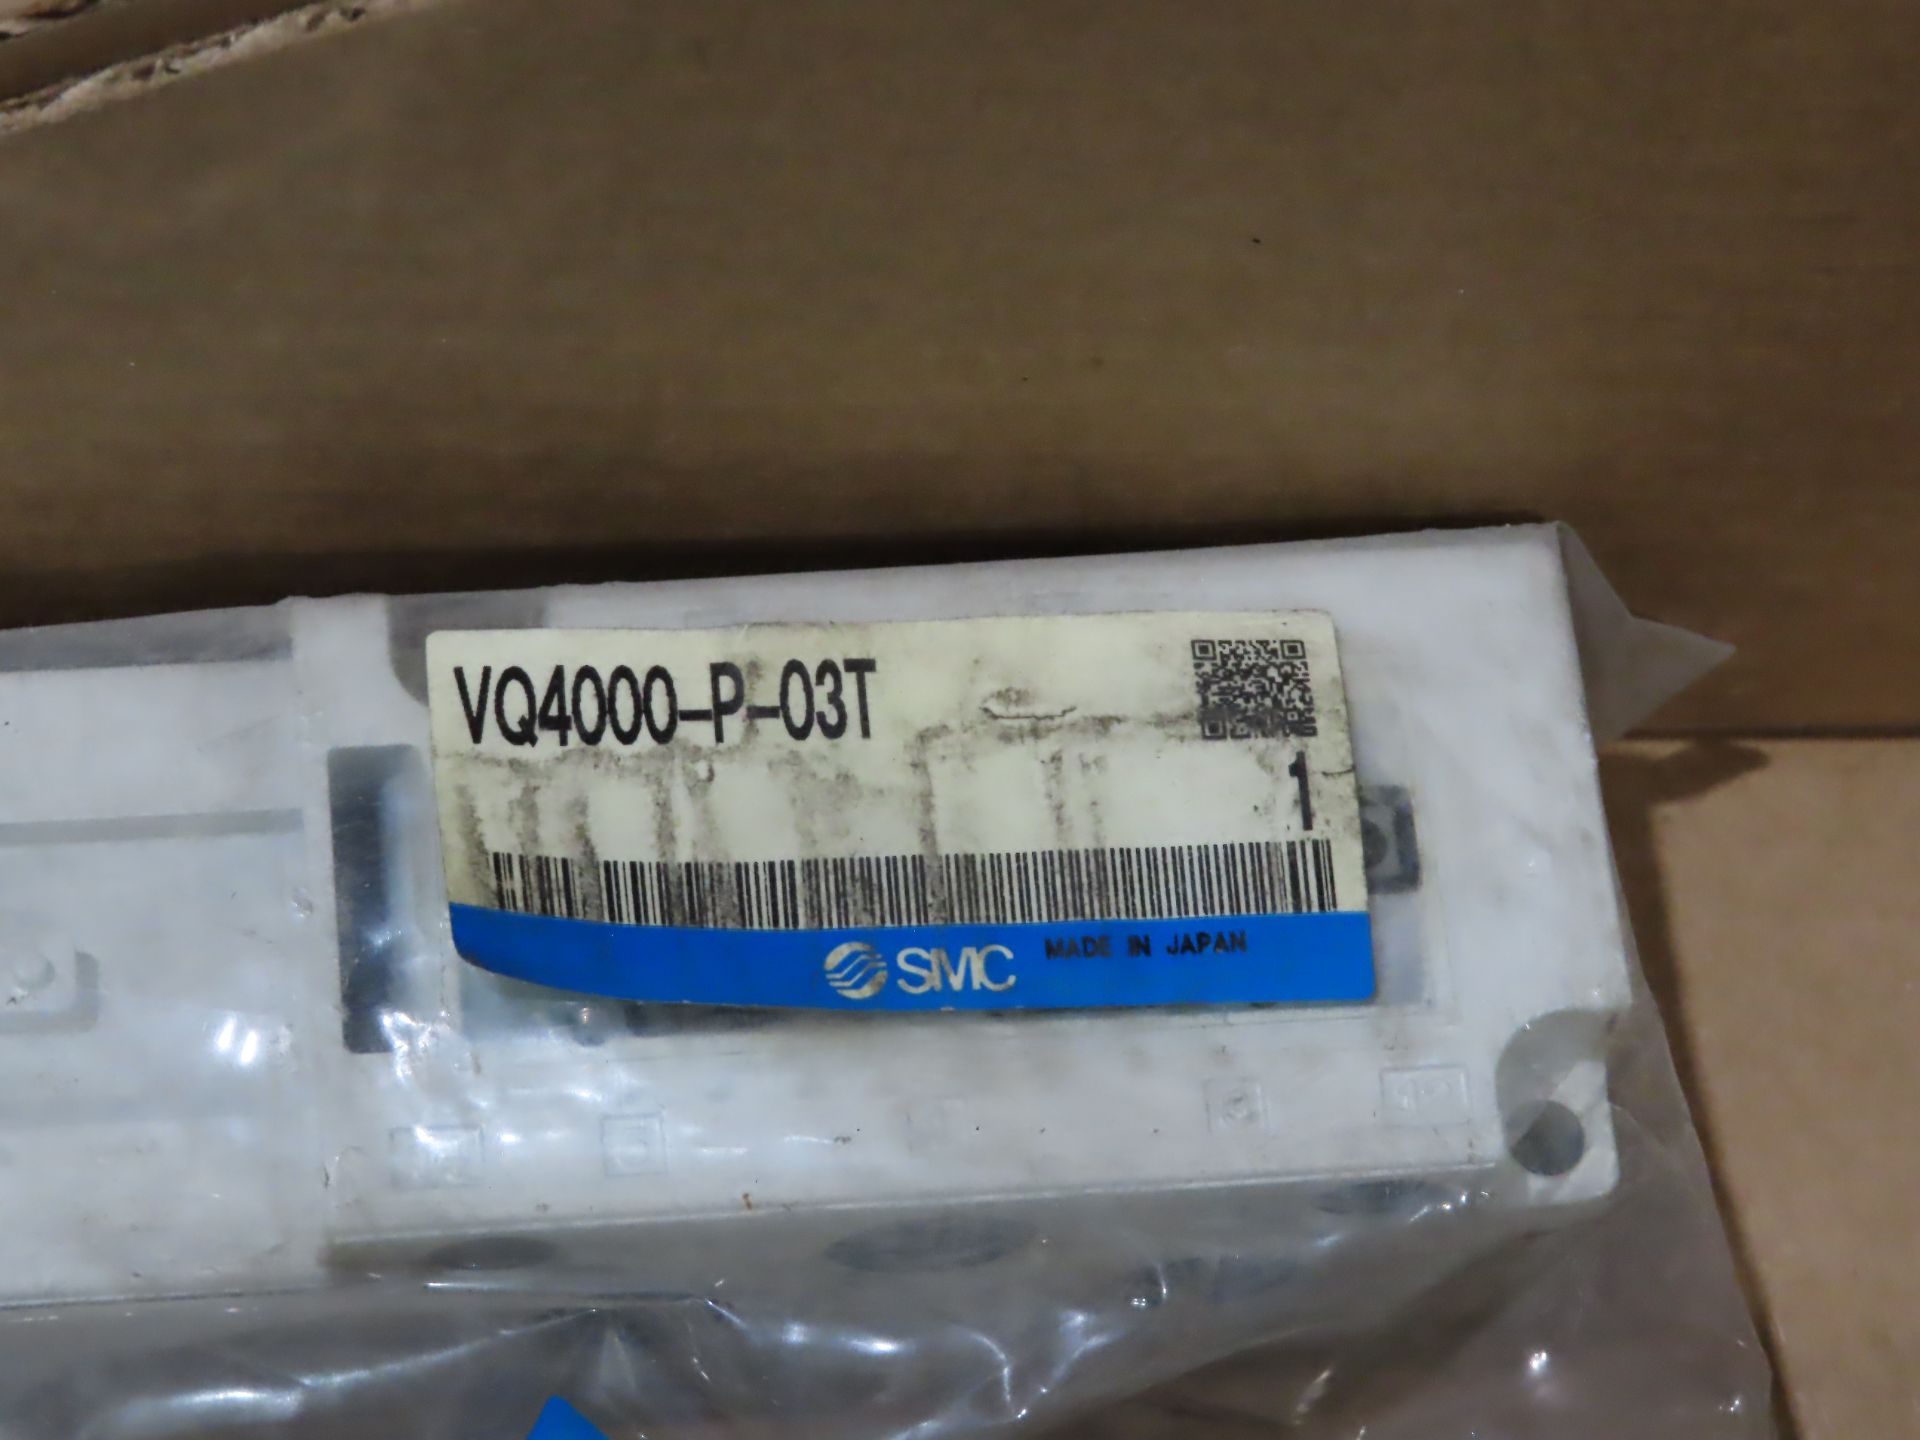 Qty 2 SMC model VQ4000-P-03T, new in package, as always with Brolyn LLC auctions, all lots can be - Image 2 of 2